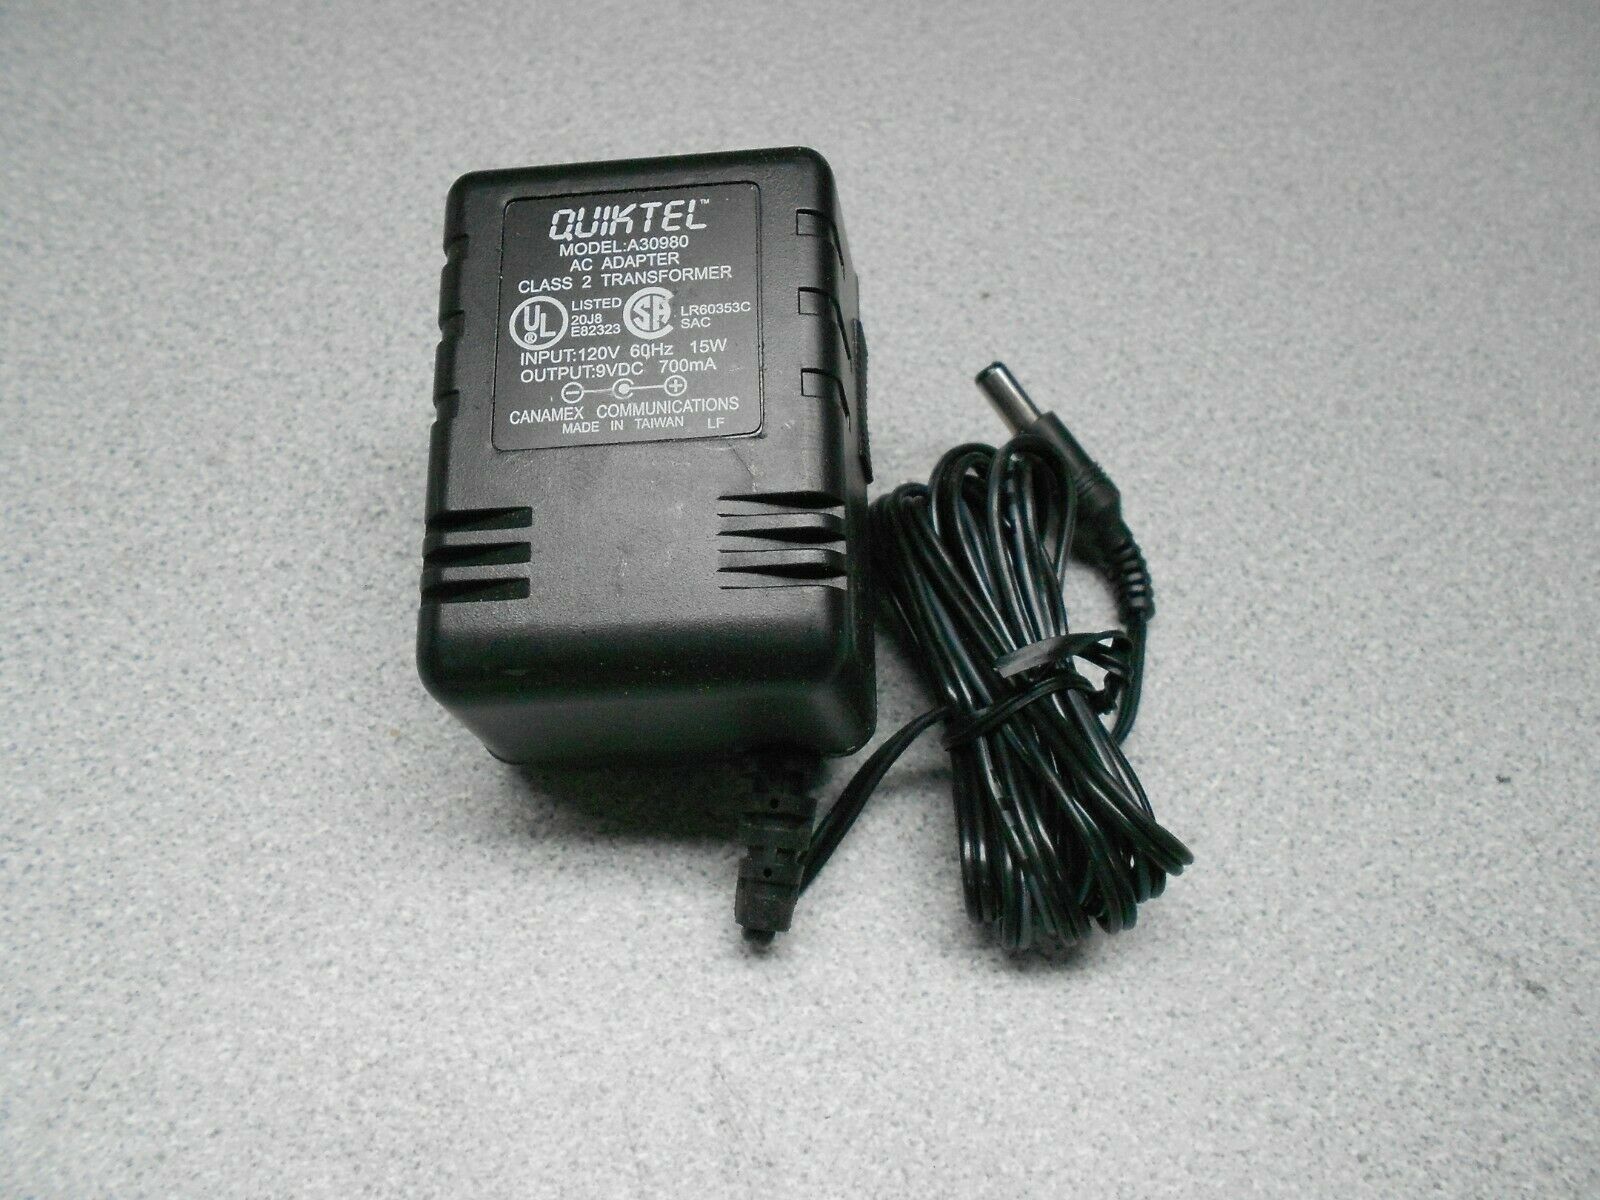 New Quiktel Model A30980 Power Supply 9VDC 800mA Country/Region of Manufacture: China Custom Bundle: No MPN: A30980